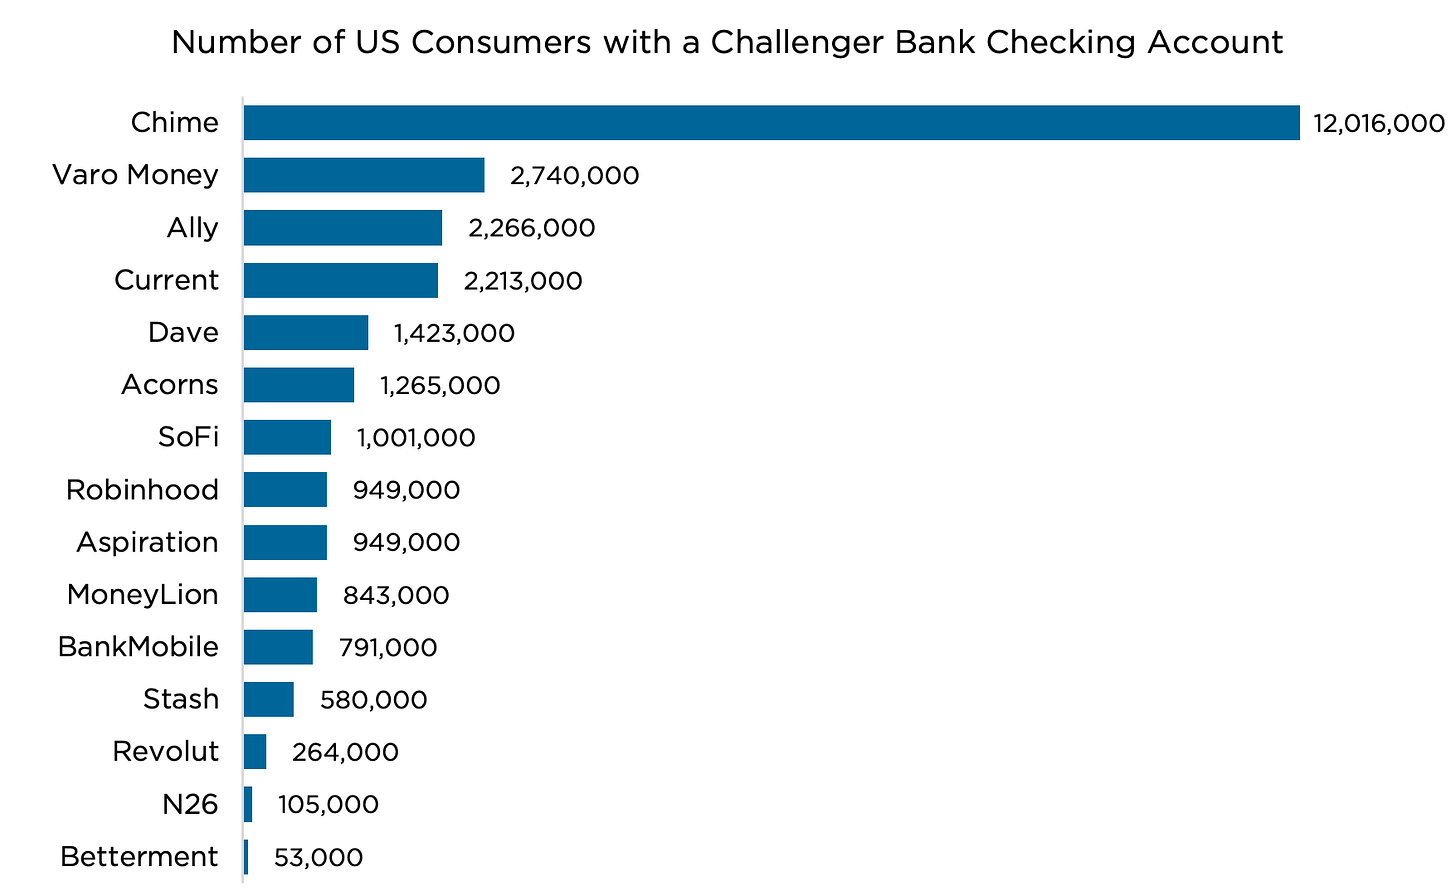 Challenger Bank Chime Reaches The 12 Million Customer Mark